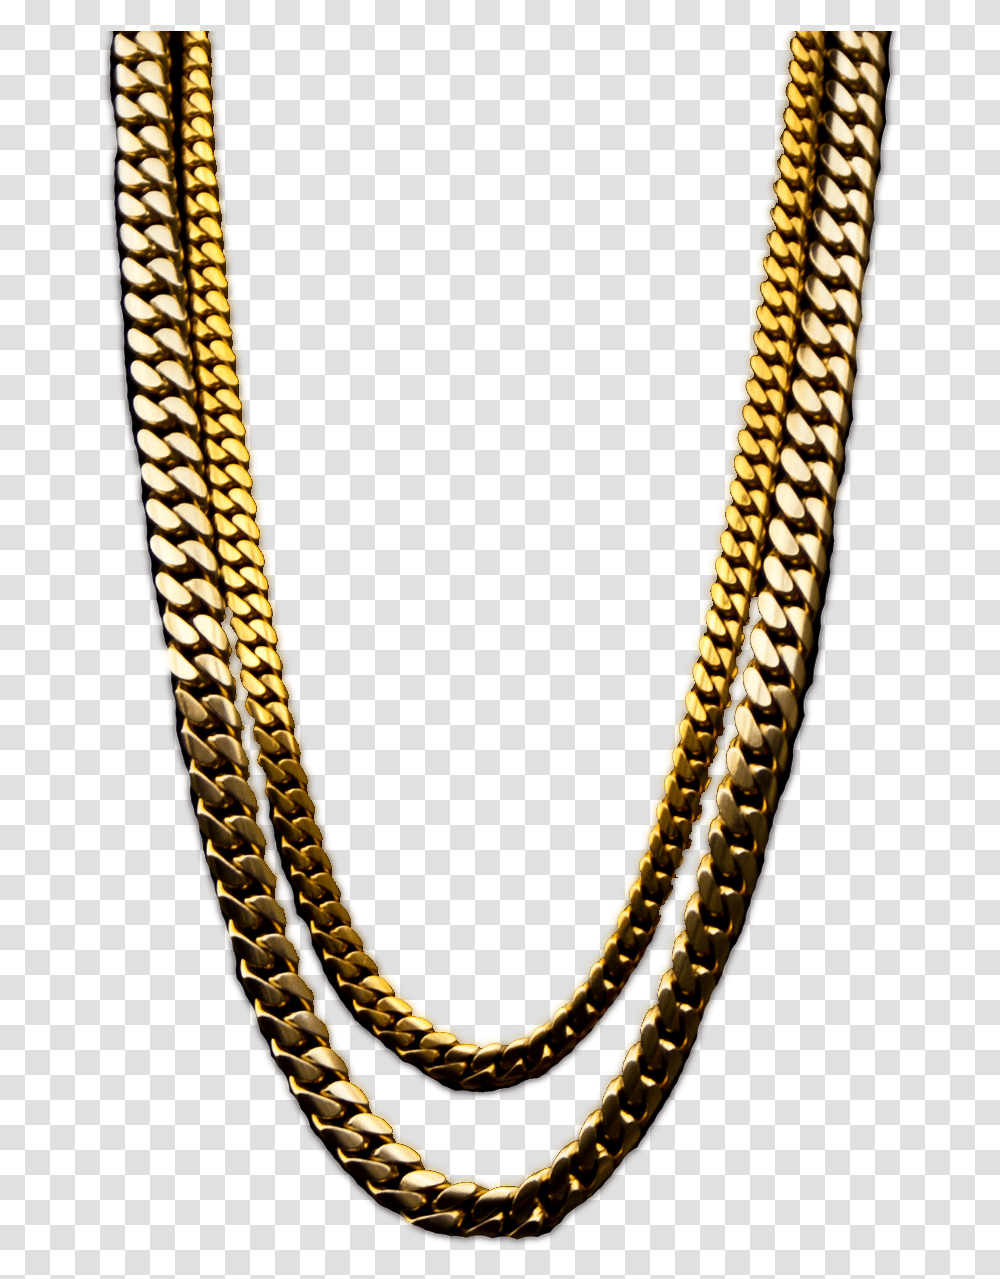 Gangster Gold Chains Rap Free Album Covers, Snake, Reptile, Animal, Necklace Transparent Png